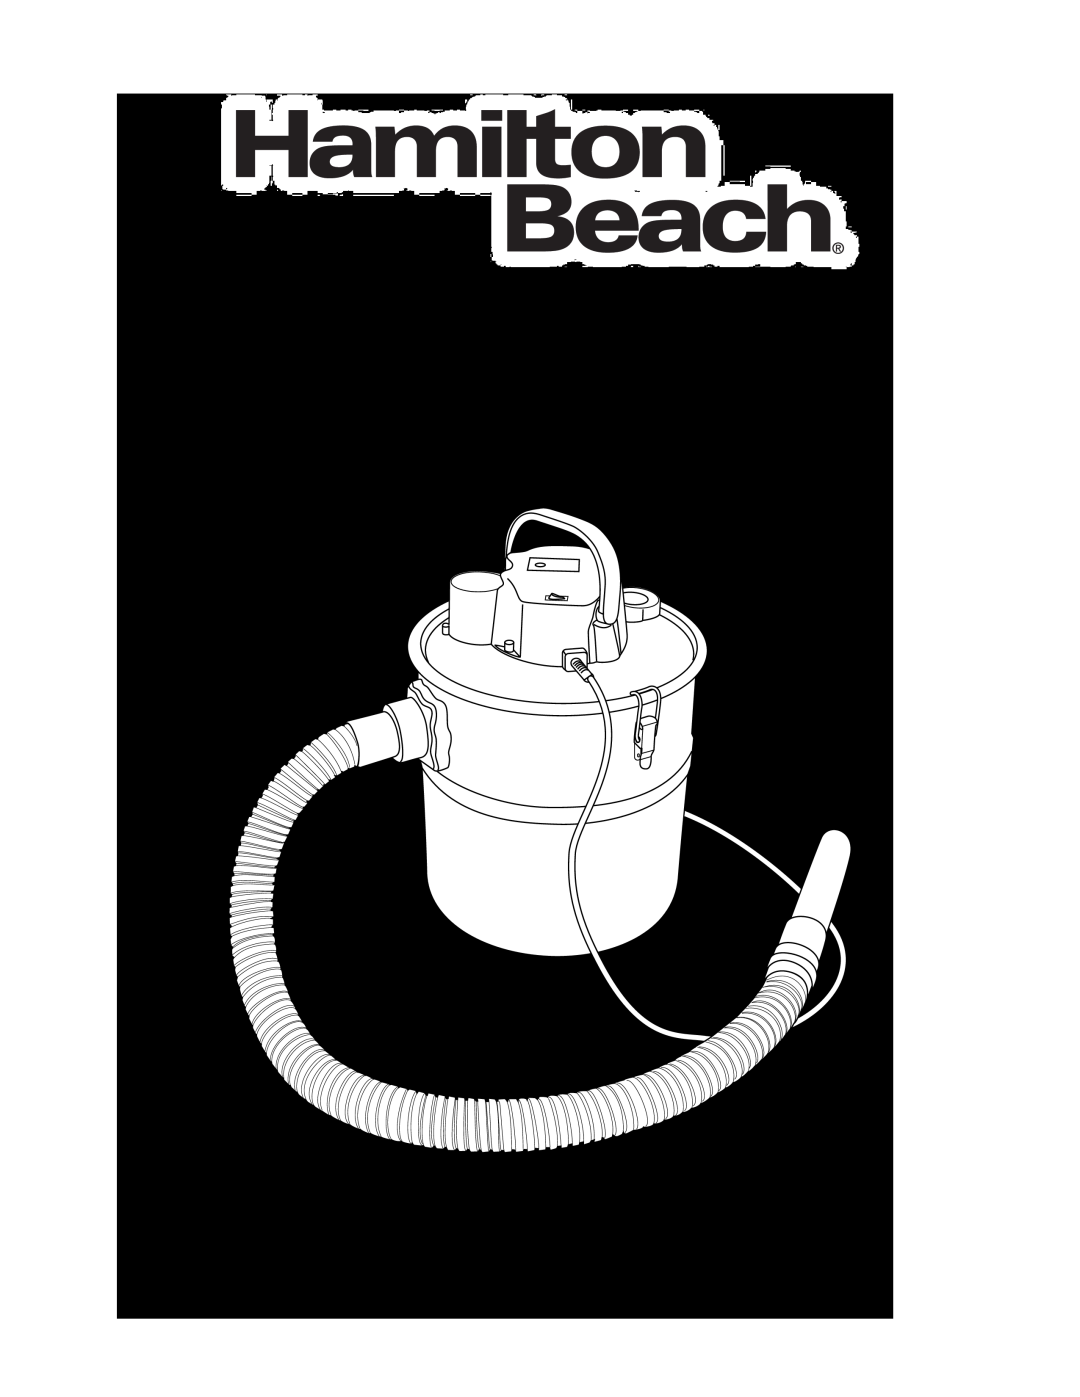 Hamilton Beach owner manual Fireplace Vacuum Cleaner, Model No. HB-405, Read Before Use 